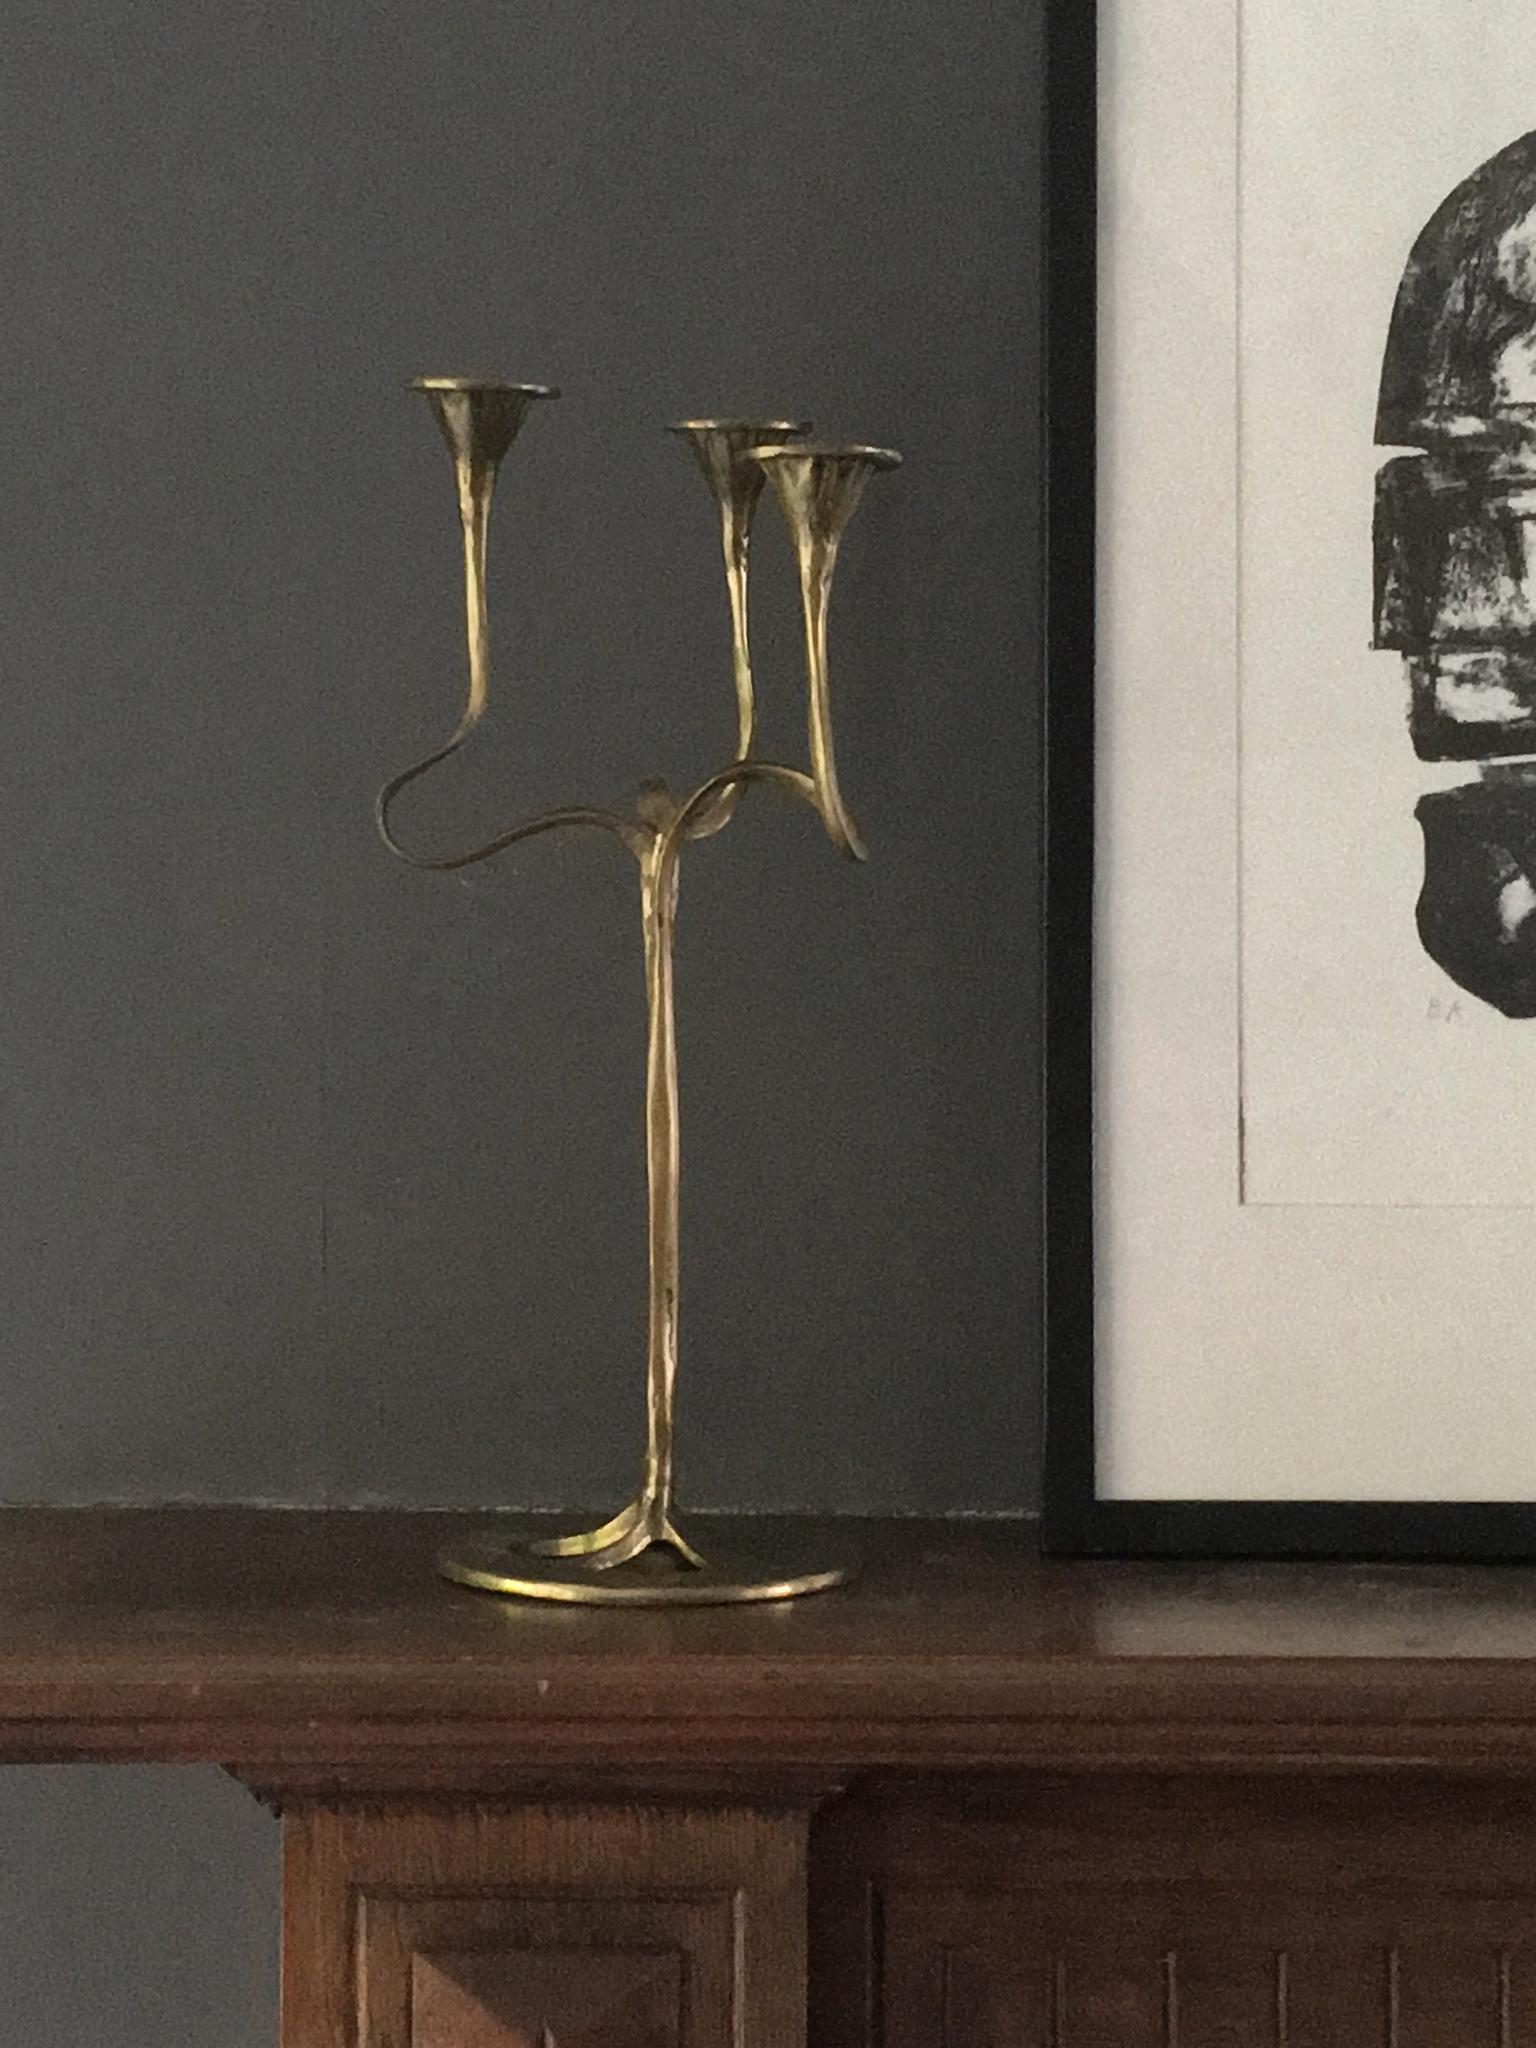 A three-arm candlestick of organic, ribbon form, evoking Art Nouveau style. 

The piece is made of solid brass and is in good original condition with a nice patina. There minor age-appropriate signs of wear, including faint scratches, spots of